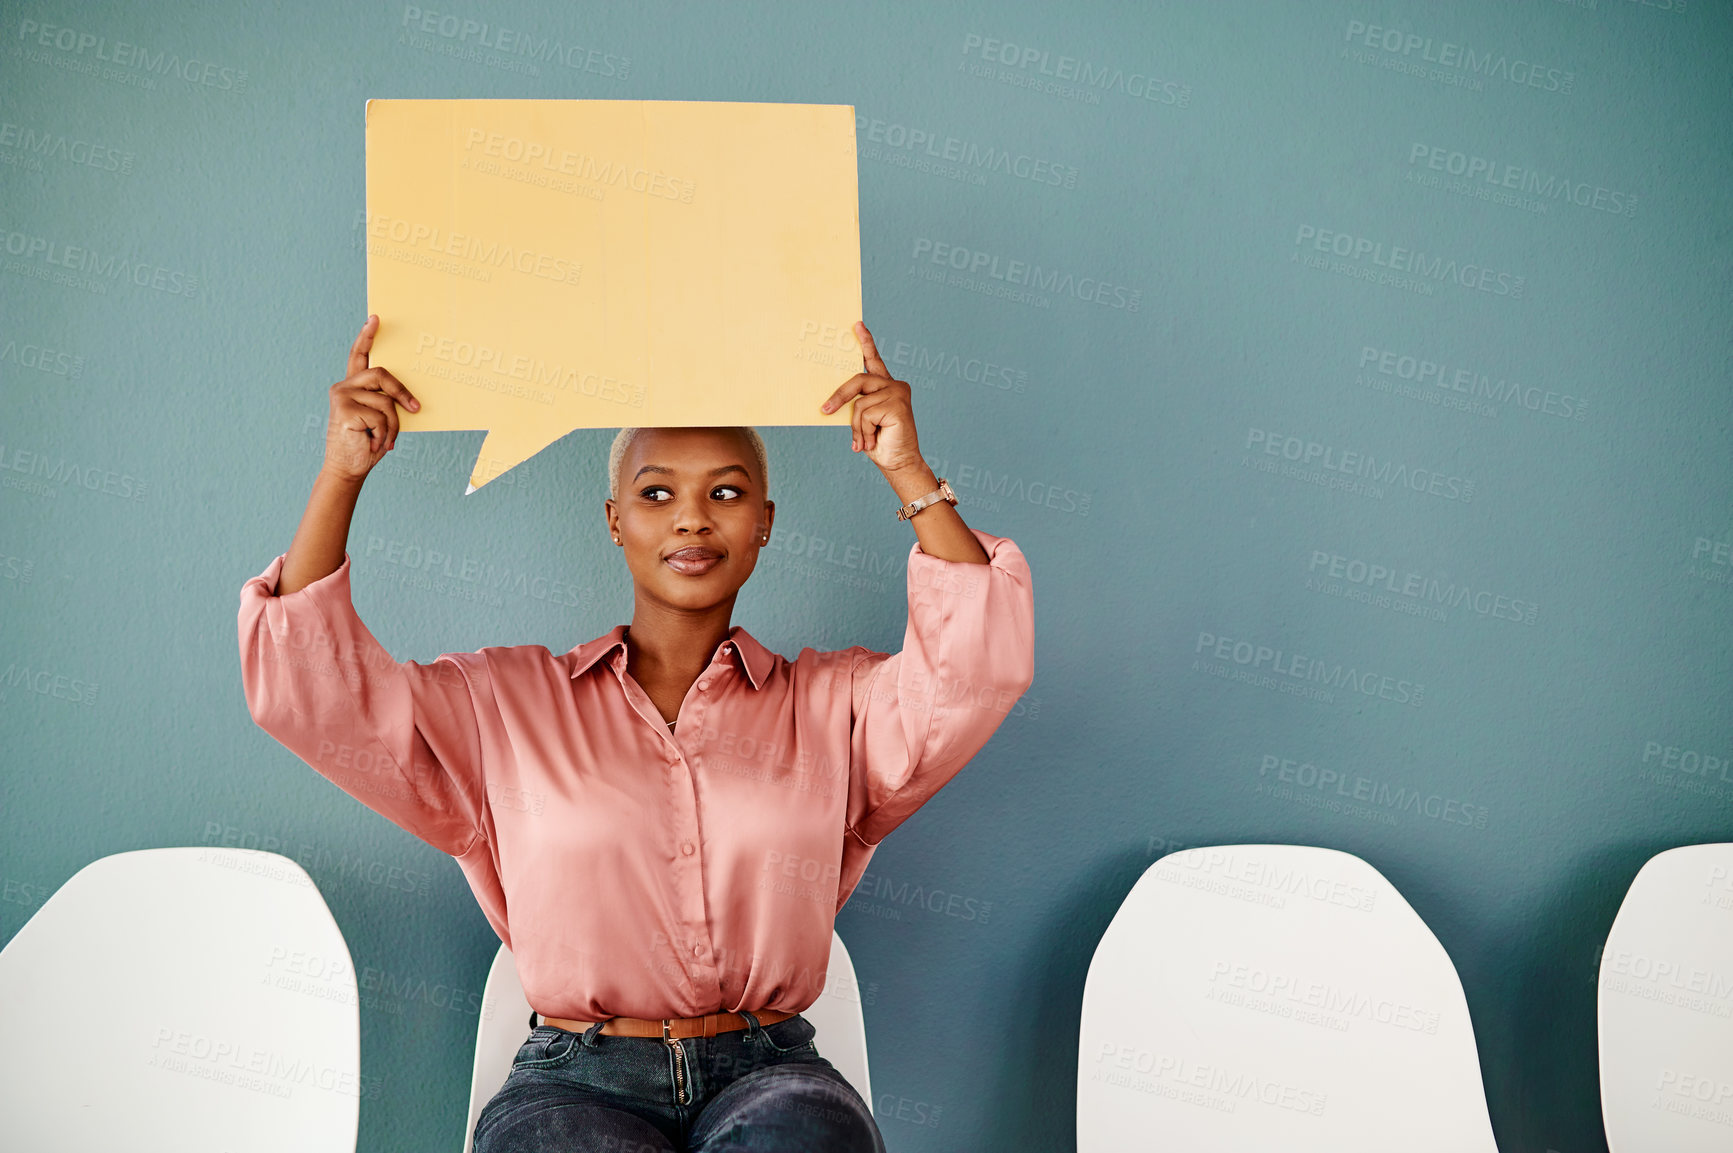 Buy stock photo Studio shot of an attractive young businesswoman looking thoughtful while holding up a speech bubble against a grey background